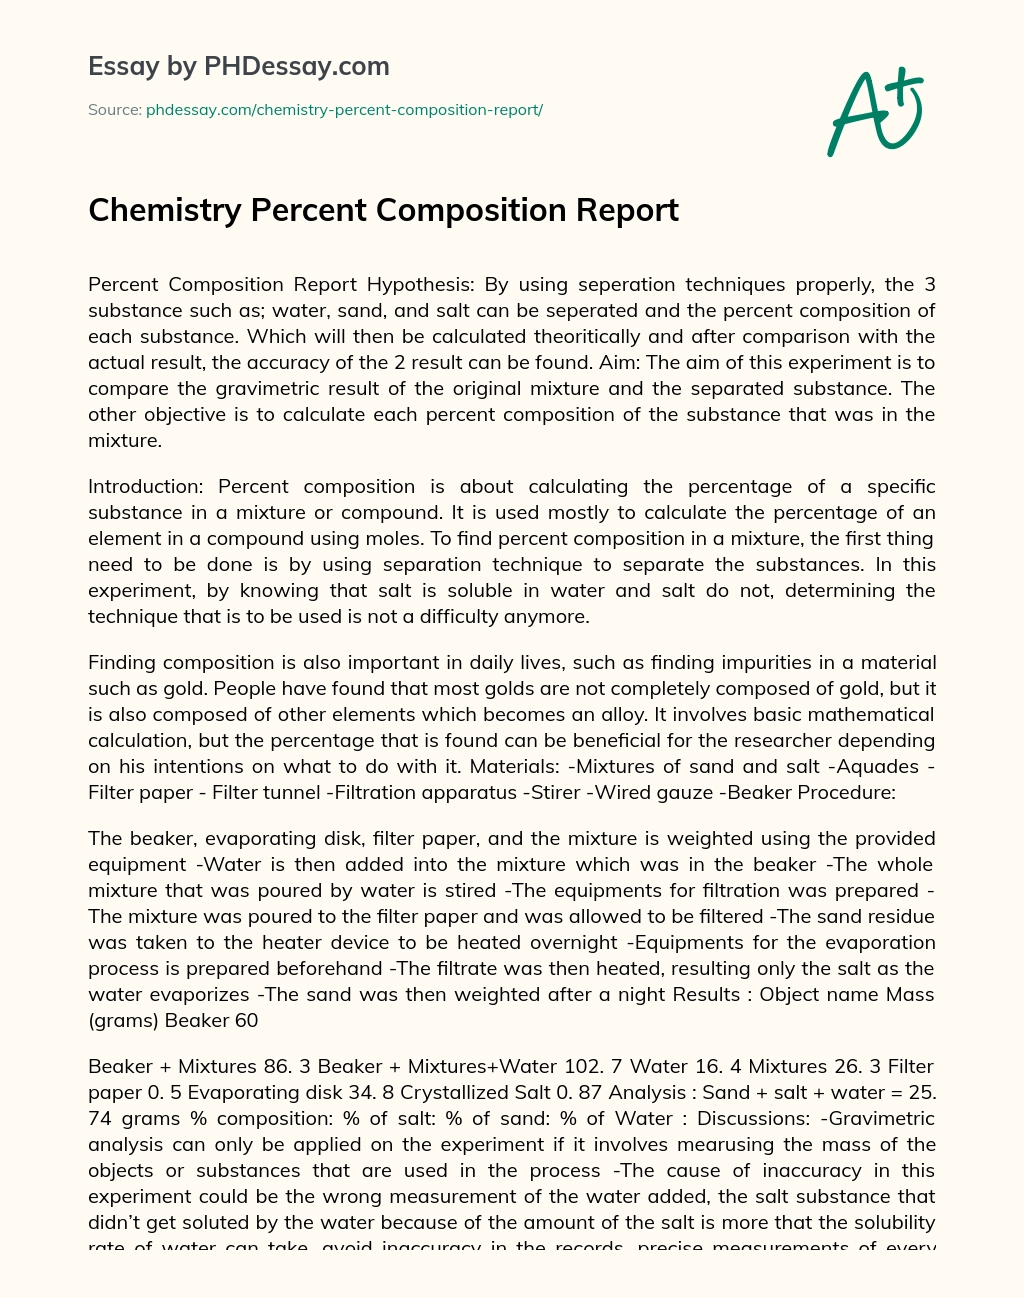 Chemistry Percent Composition Report essay